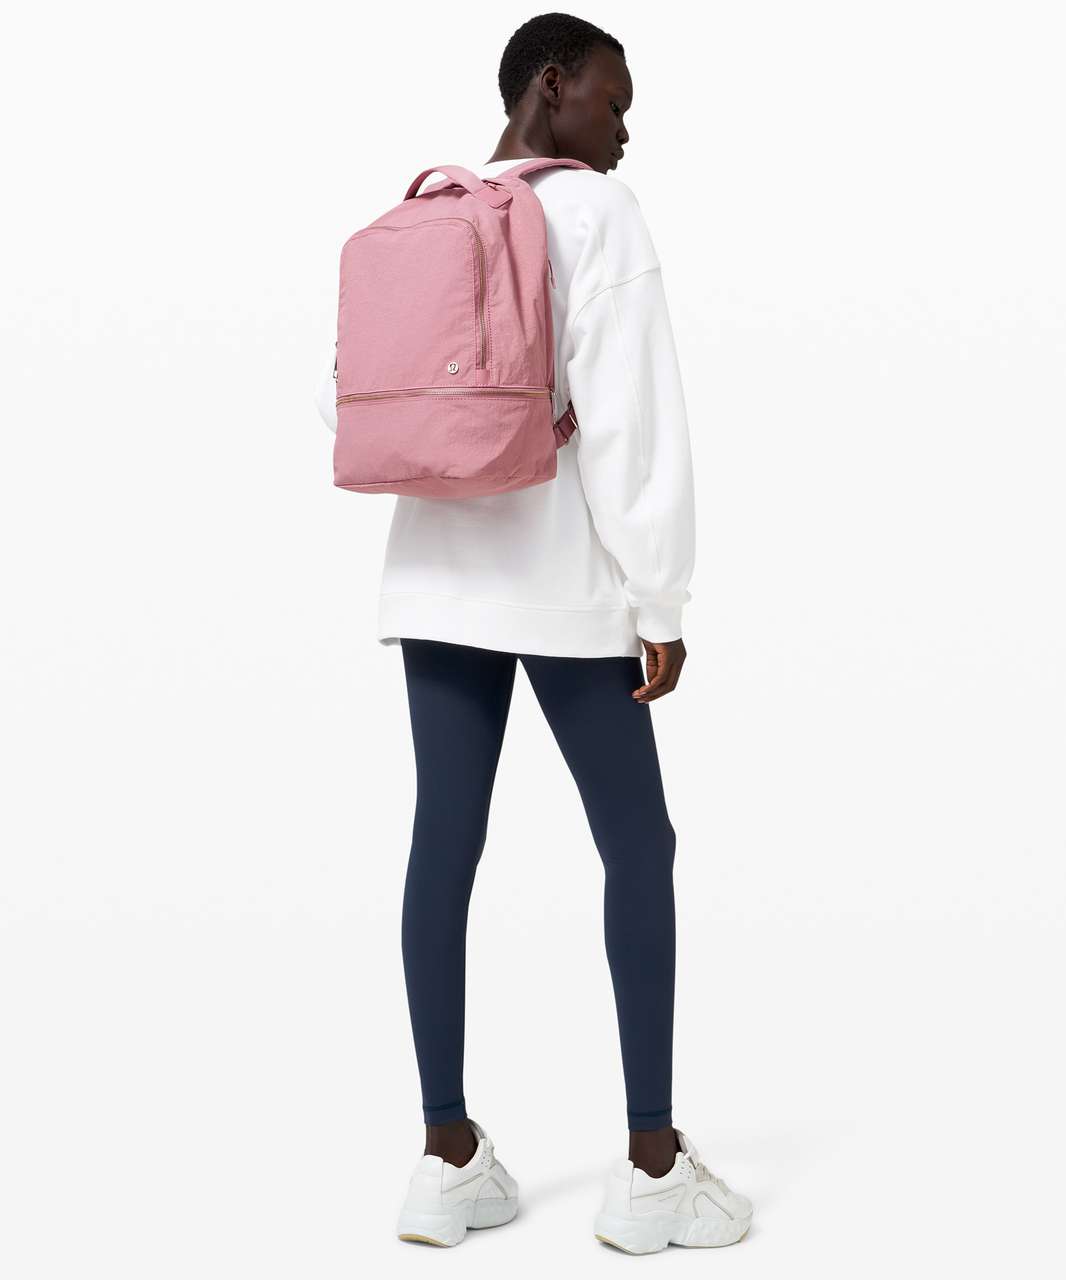 LULULEMON BACKPACK REVIEW  City Adventurer Backpack in Pink Pastel (great  for travel or everyday) 